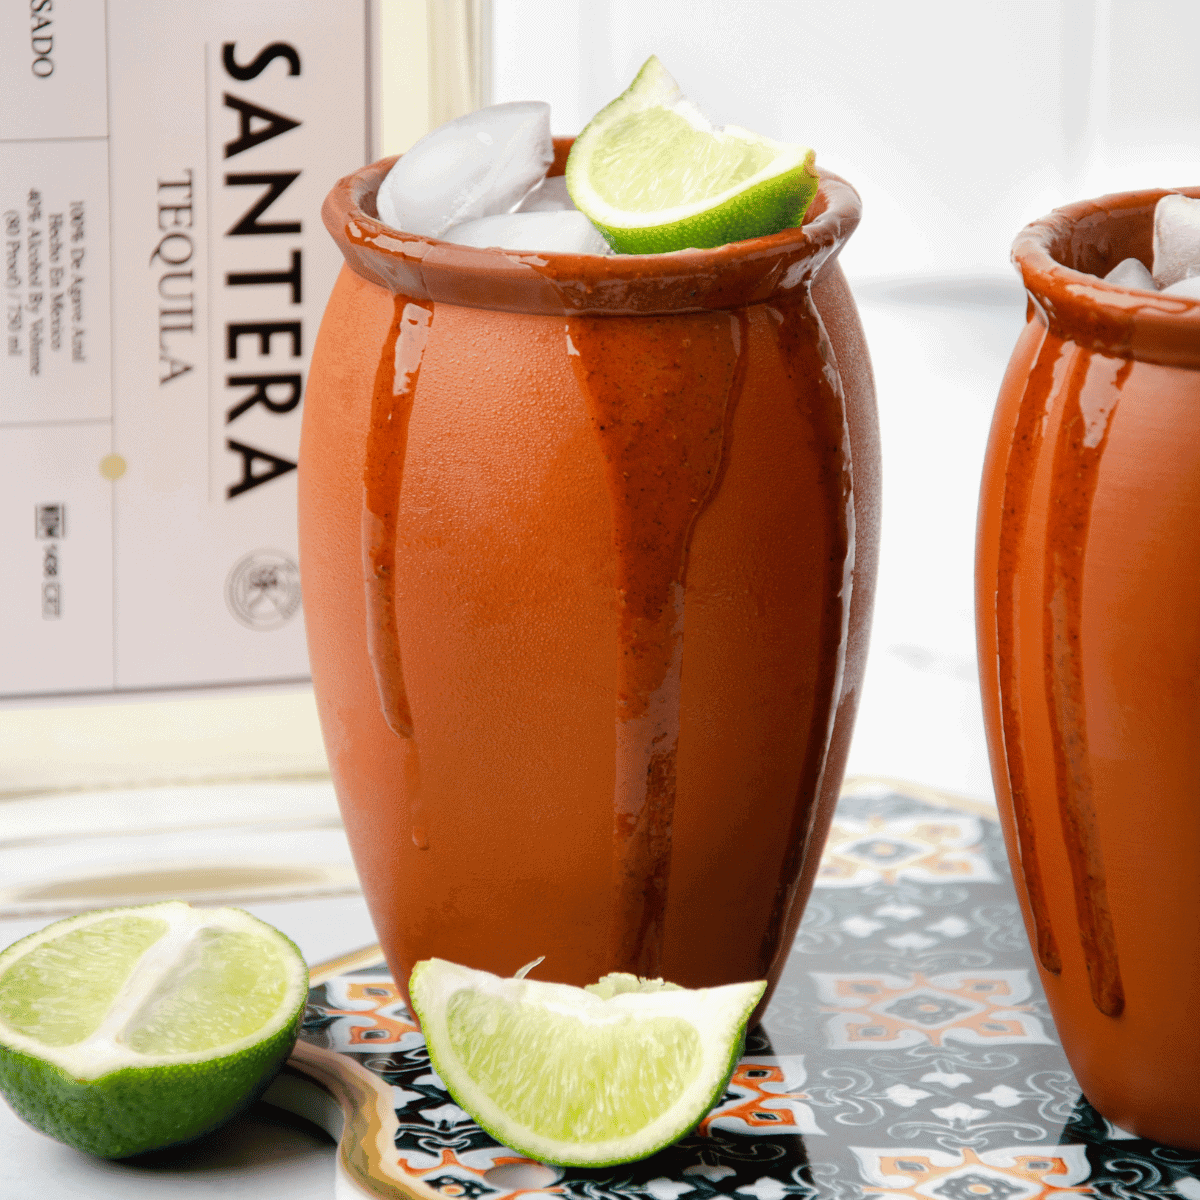 A Mexican Cantarito cocktail served in the traditional clay cup with a bottle of Santera Tequila in the background.